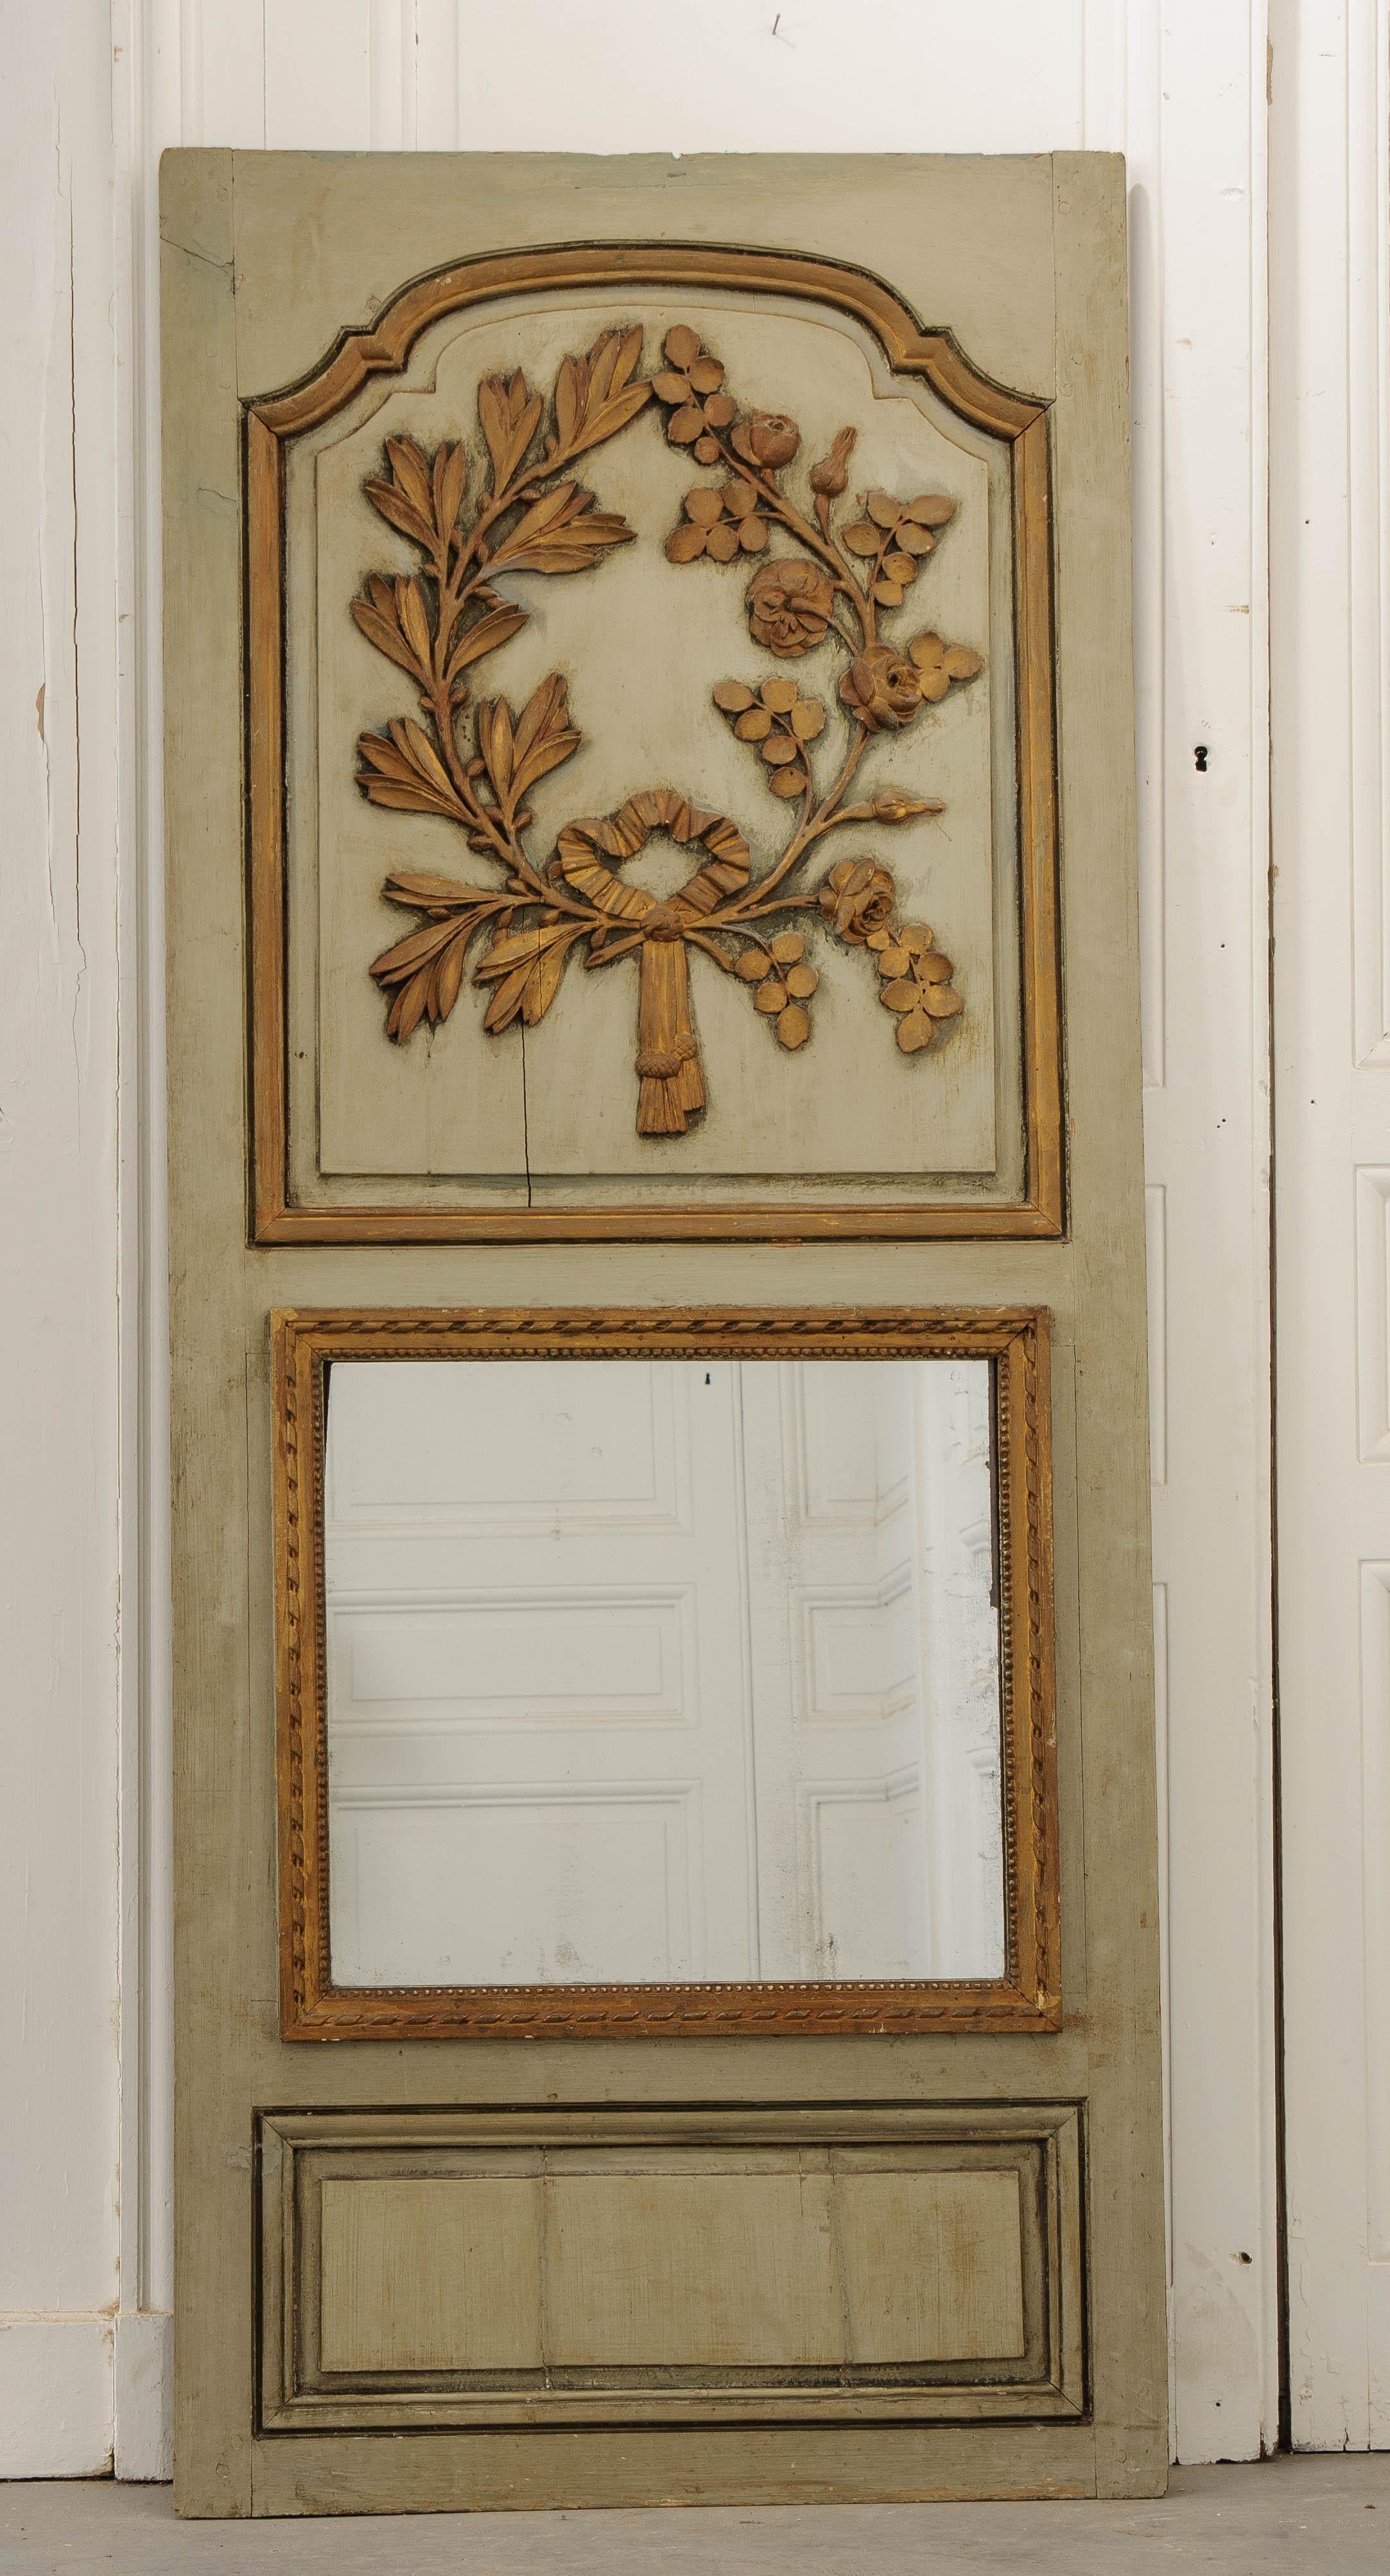 An exceptional carved and painted Trumeau mirror, circa 1800, France. The antique mirror features a large carved and gilt wreath that is situated in the larger shaped panel above the glass. It consists of carved and blossoming roses on one side,